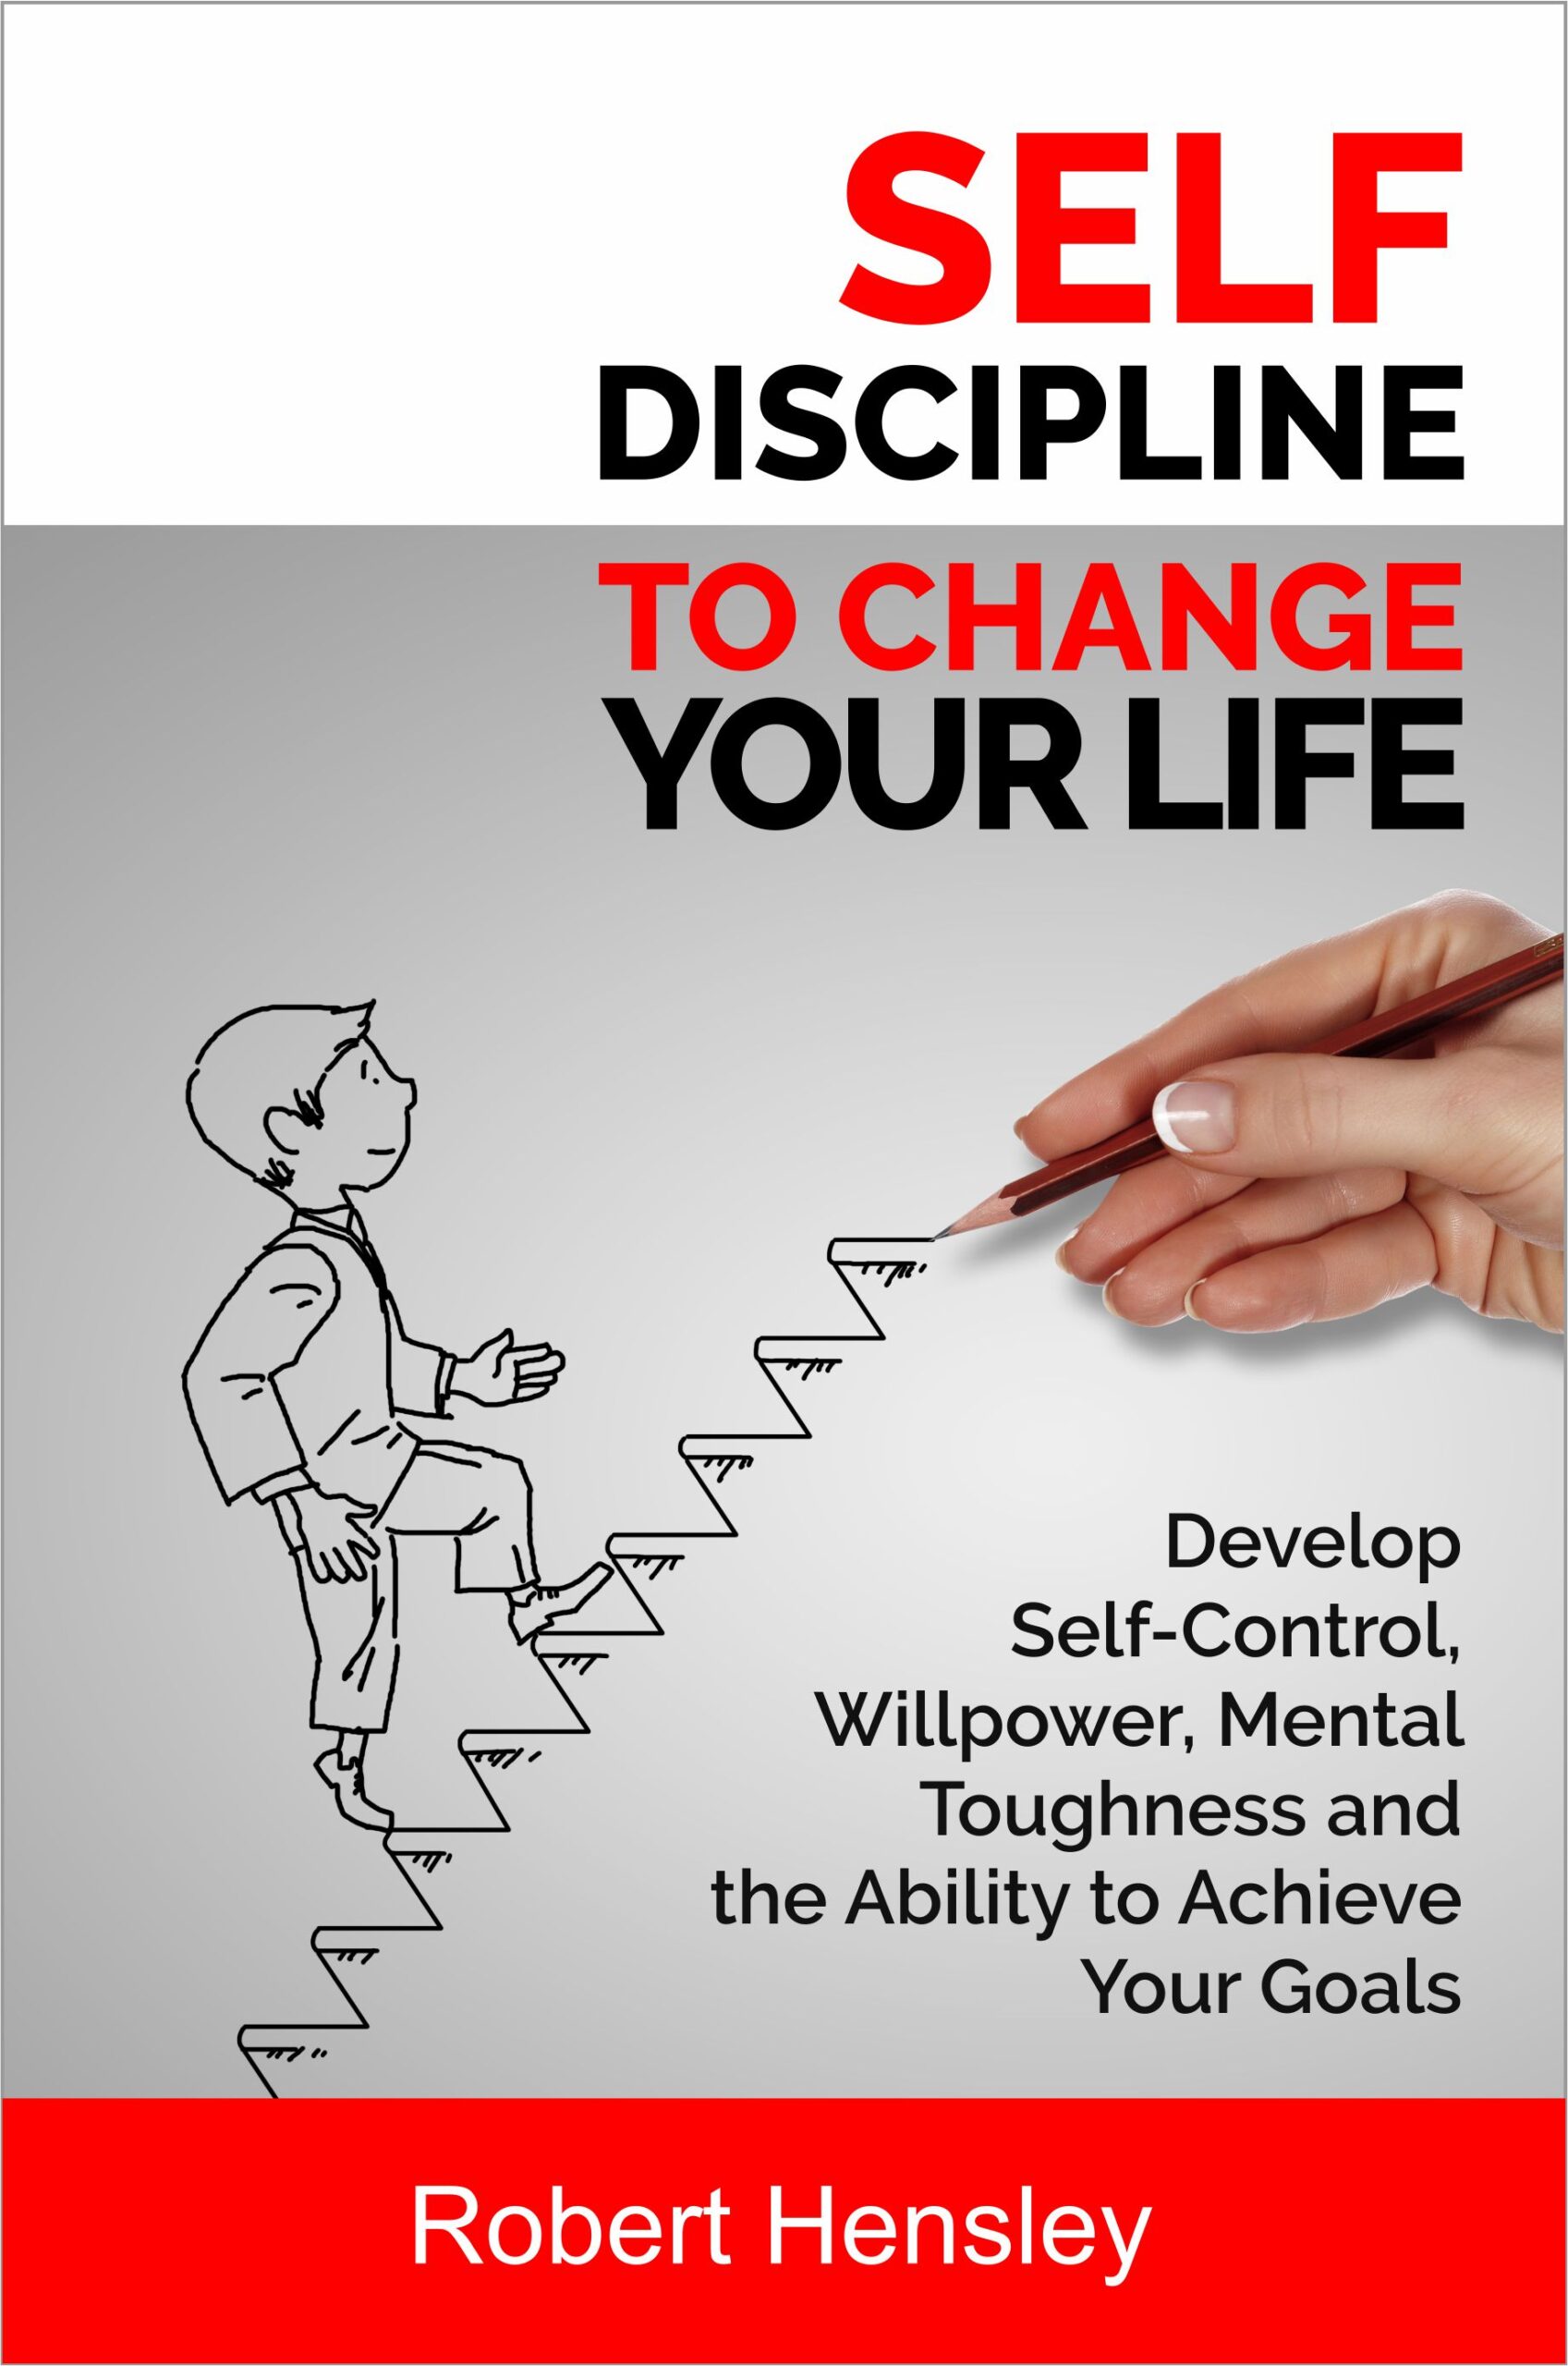 FREE: Self-Discipline to Change Your Life: Develop Self-Control, Willpower, Mental Toughness, and the Ability to Achieve Your Goals by Robert Hensley